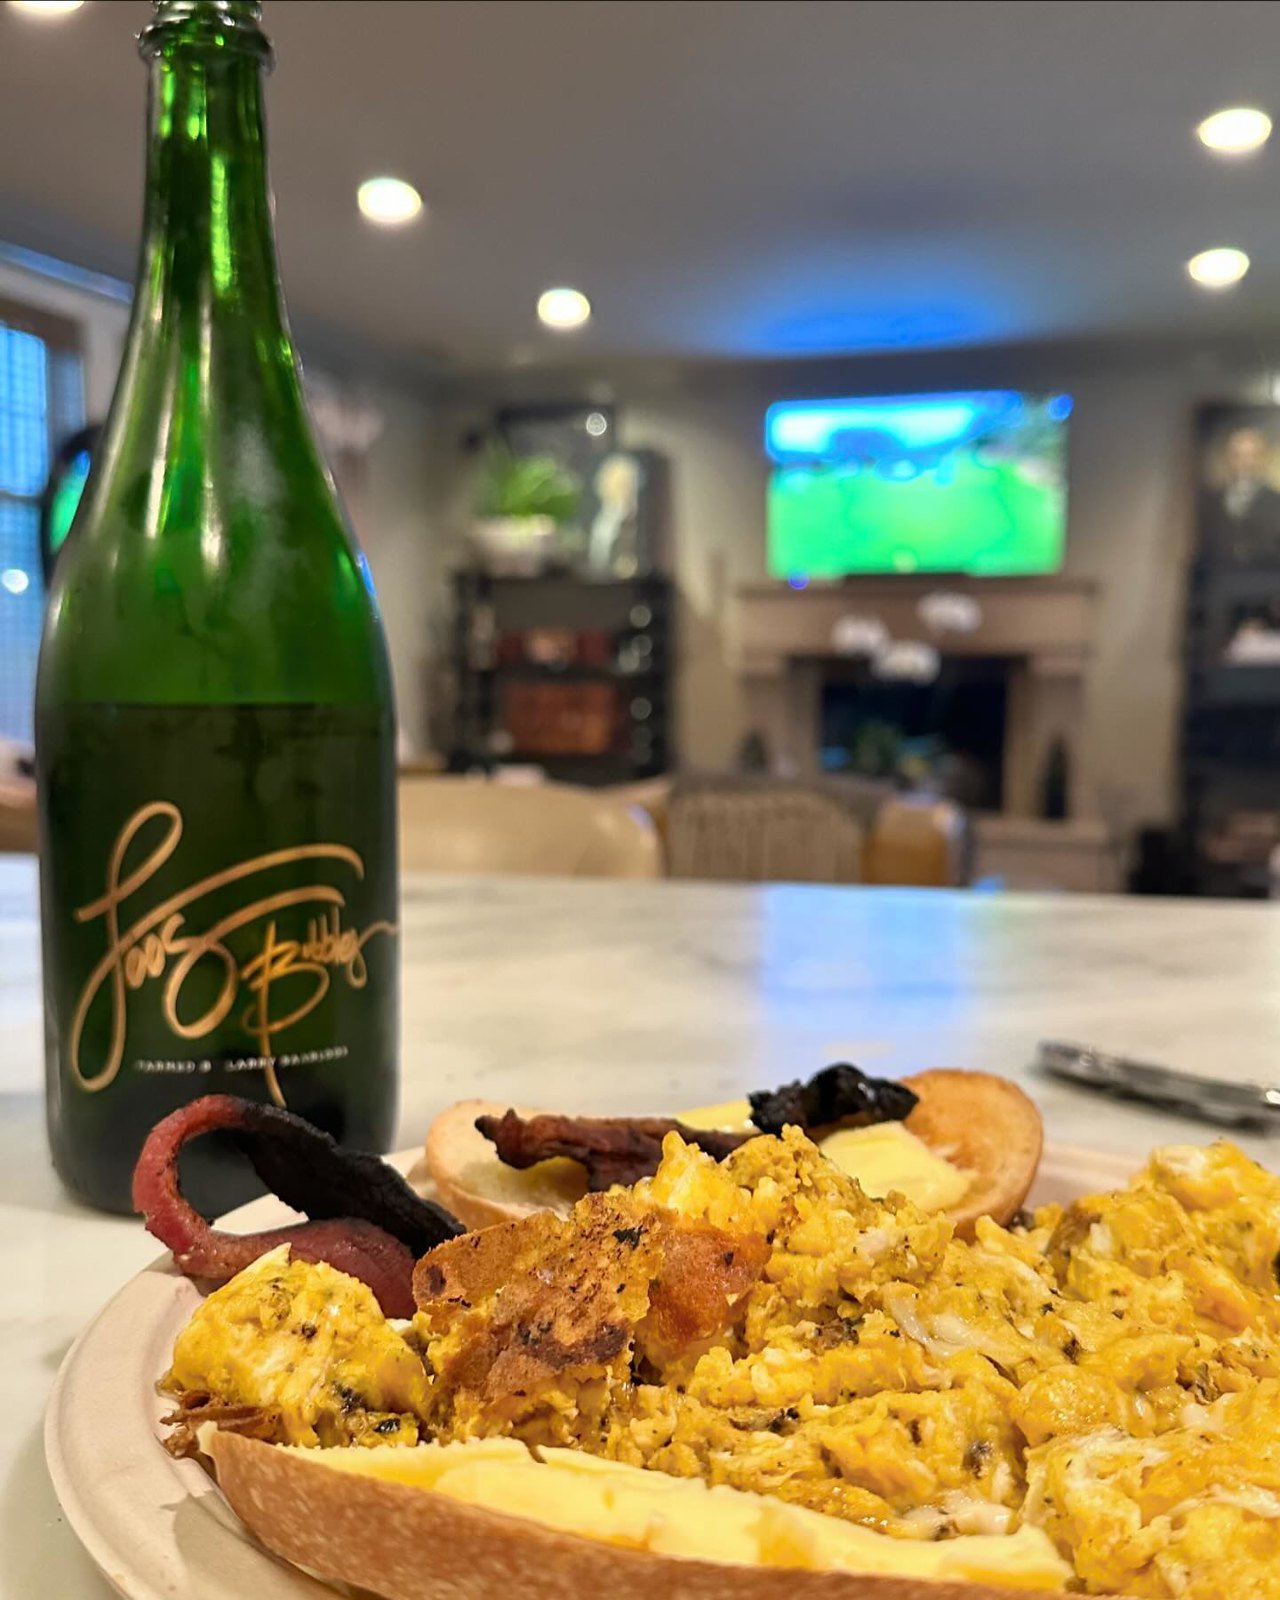 Sunday morning, coming down.  My wife is out of town.  My son slept at a friends house last night.  It’s raining outside.  I’m still in my PJs.  I made a garbage fire omelette I  popped a bottle of loos bubbles. I am watching @themasters  I lit a fire.